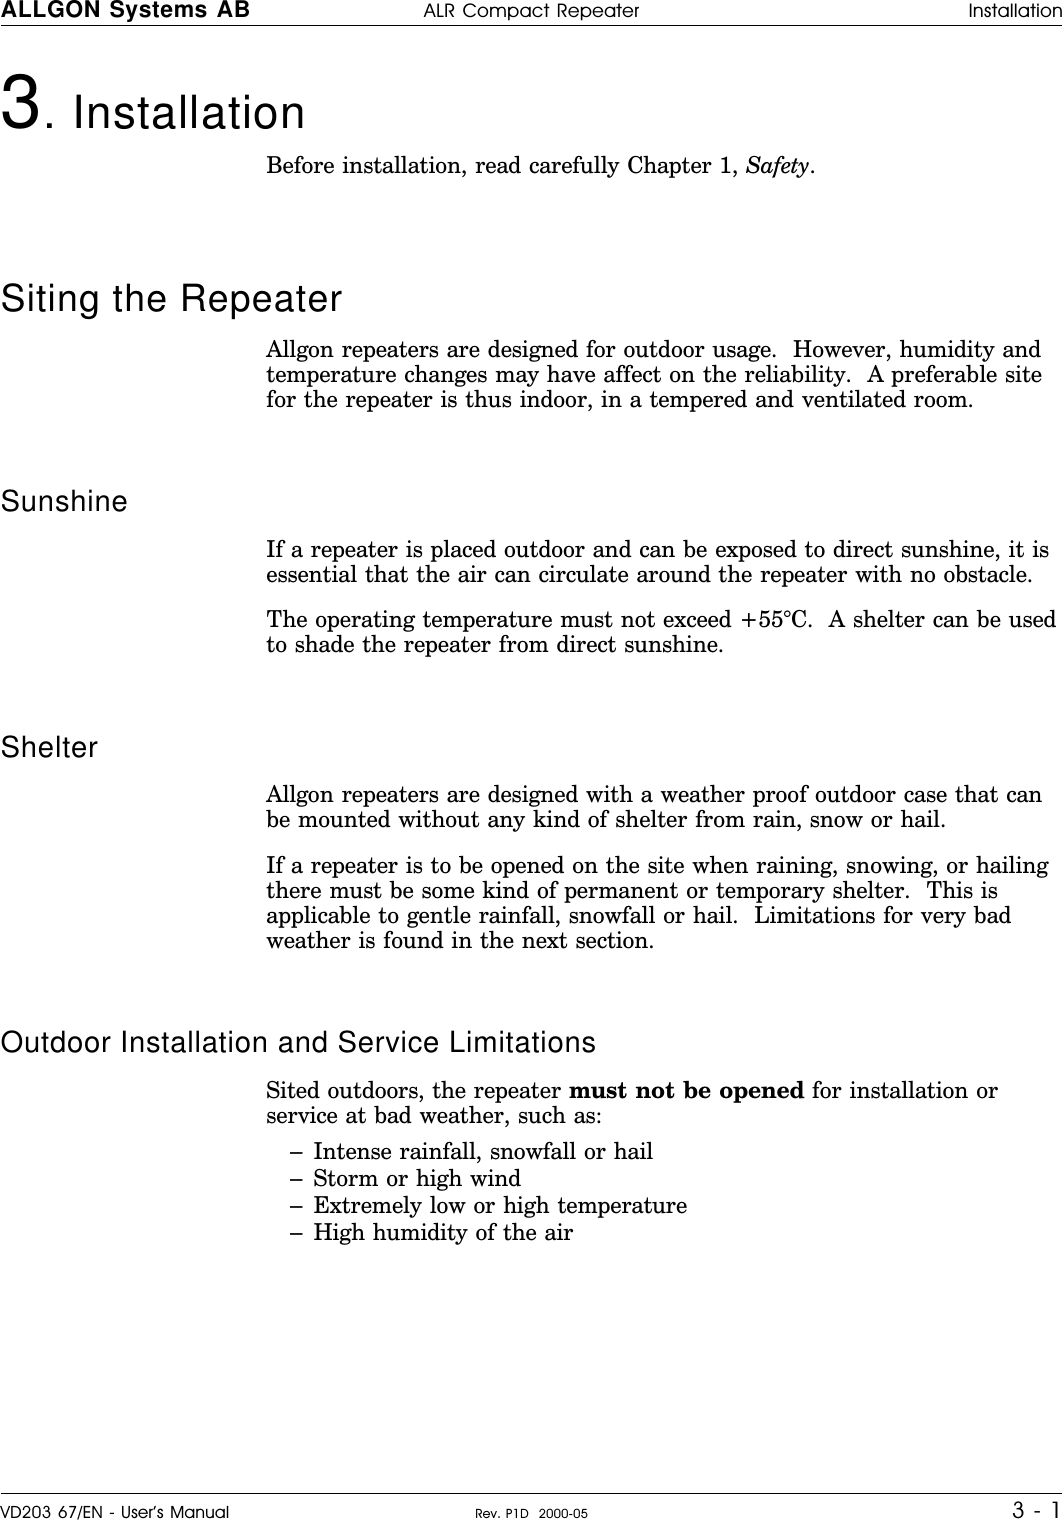 3. InstallationBefore installation, read carefully Chapter 1, Safety.Siting the Repeater Allgon repeaters are designed for outdoor usage.  However, humidity andtemperature changes may have affect on the reliability.  A preferable sitefor the repeater is thus indoor, in a tempered and ventilated room.Sunshine If a repeater is placed outdoor and can be exposed to direct sunshine, it isessential that the air can circulate around the repeater with no obstacle.The operating temperature must not exceed +55°C.  A shelter can be usedto shade the repeater from direct sunshine.Shelter     Allgon repeaters are designed with a weather proof outdoor case that canbe mounted without any kind of shelter from rain, snow or hail.If a repeater is to be opened on the site when raining, snowing, or hailingthere must be some kind of permanent or temporary shelter.  This isapplicable to gentle rainfall, snowfall or hail.  Limitations for very badweather is found in the next section.Outdoor Installation and Service Limitations   Sited outdoors, the repeater must not be opened for installation orservice at bad weather, such as:–Intense rainfall, snowfall or hail–Storm or high wind–Extremely low or high temperature–High humidity of the airALLGON Systems AB ALR Compact Repeater InstallationVD203 67/EN - User’s Manual Rev. P1D  2000-05 3 - 1